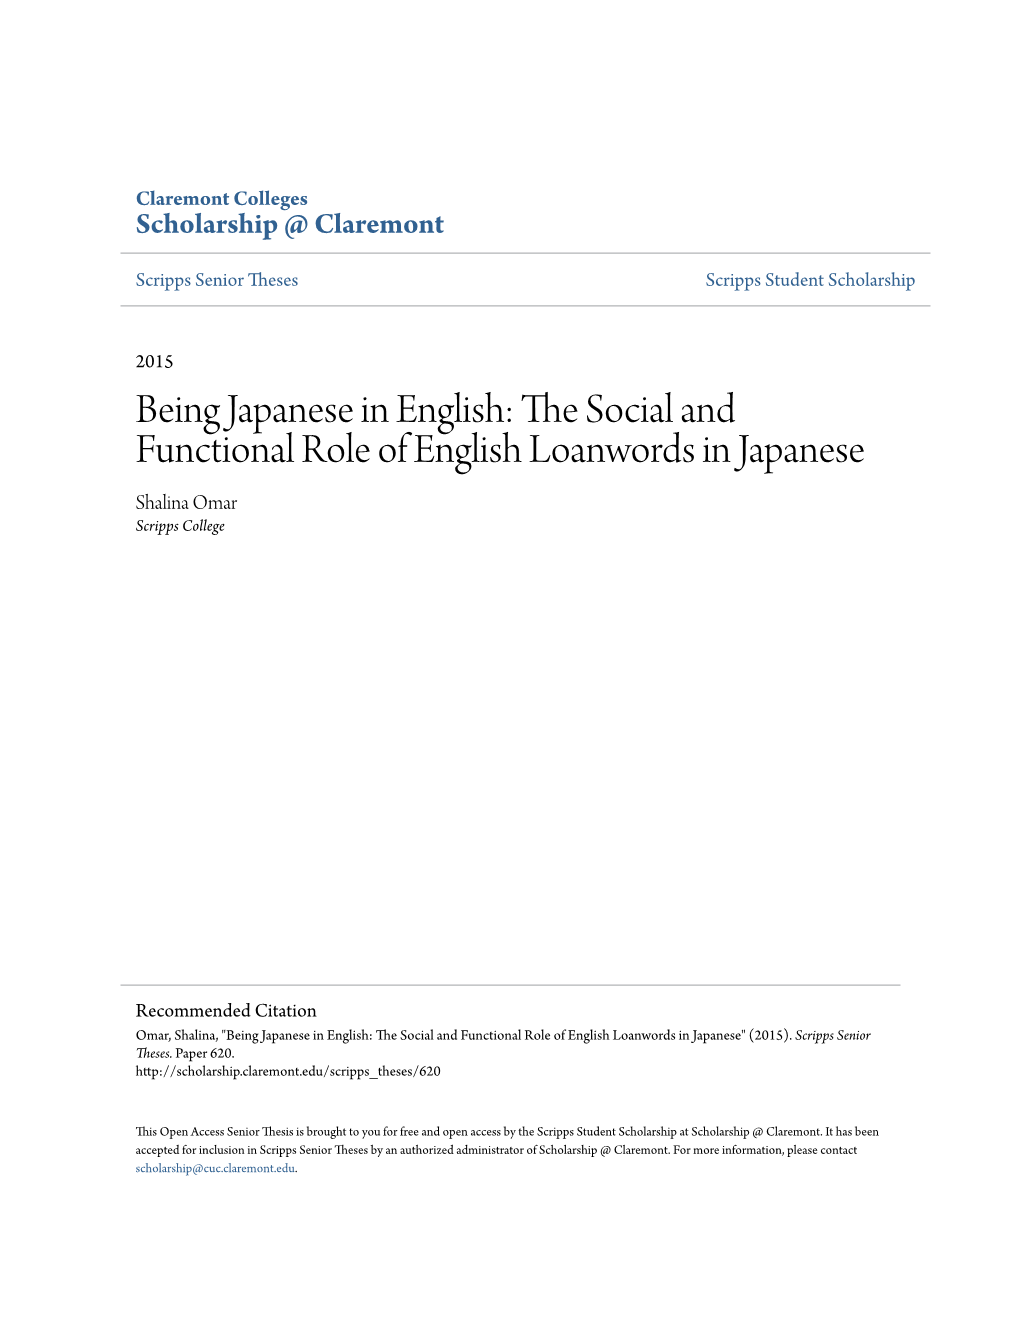 The Social and Functional Role of English Loanwords in Japanese